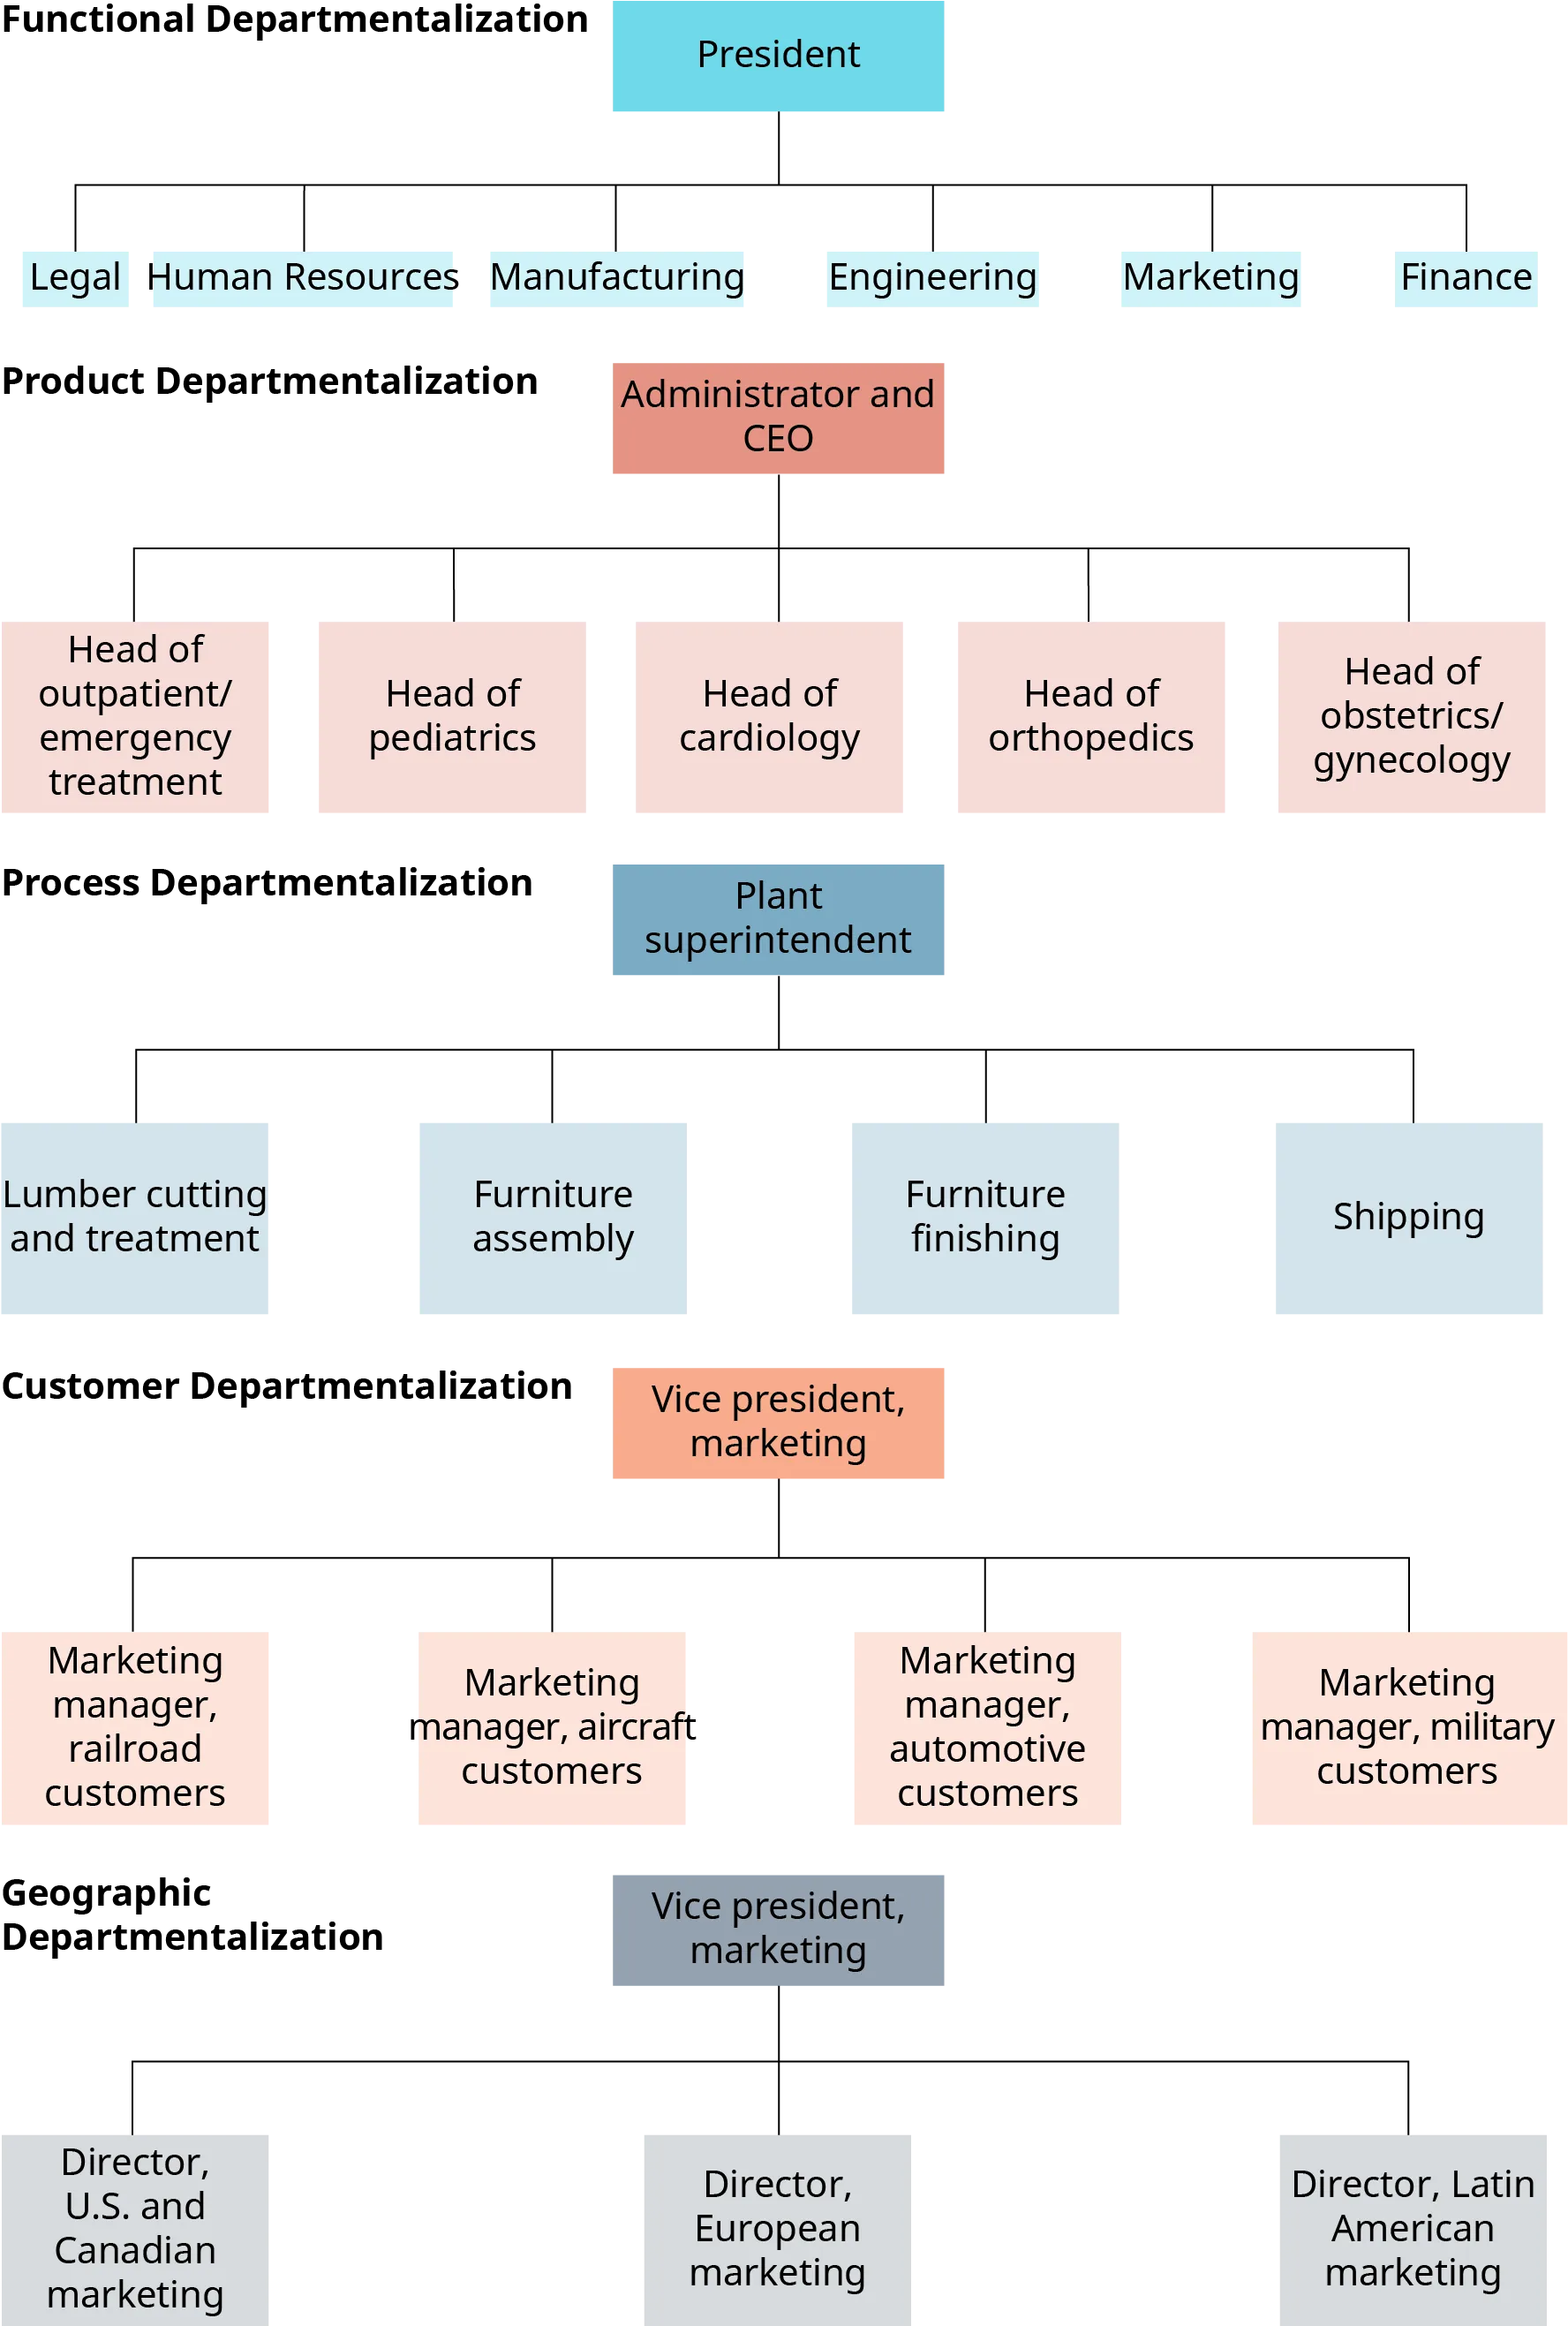 Functional departmentalization shows a president, with lines extending to legal, human resources, manufacturing, engineering, marketing, and finance. Product departmentalization shows an administrator and C E O, with lines extending to head of outpatient slash emergency treatment, head of pediatrics, head of cardiology, head of orthopedics, and head of obstetrics slash gynecology. Process departmentalization shows a plant superintendent with lines extending to lumber cutting and treatment, furniture assembly, furniture finishing, and shipping. Customer departmentalization shows the vice president of marketing, with lines extending to marketing manager, railroad customers; and marketing manager, aircraft customers; and marketing manager, automotive customers, and marketing manager, military customers. Geographic departmentalization shows the vice president of marketing, with lines extending to the director, U S and Canadian marketing; and director, European marketing; and director, Latin American marketing.